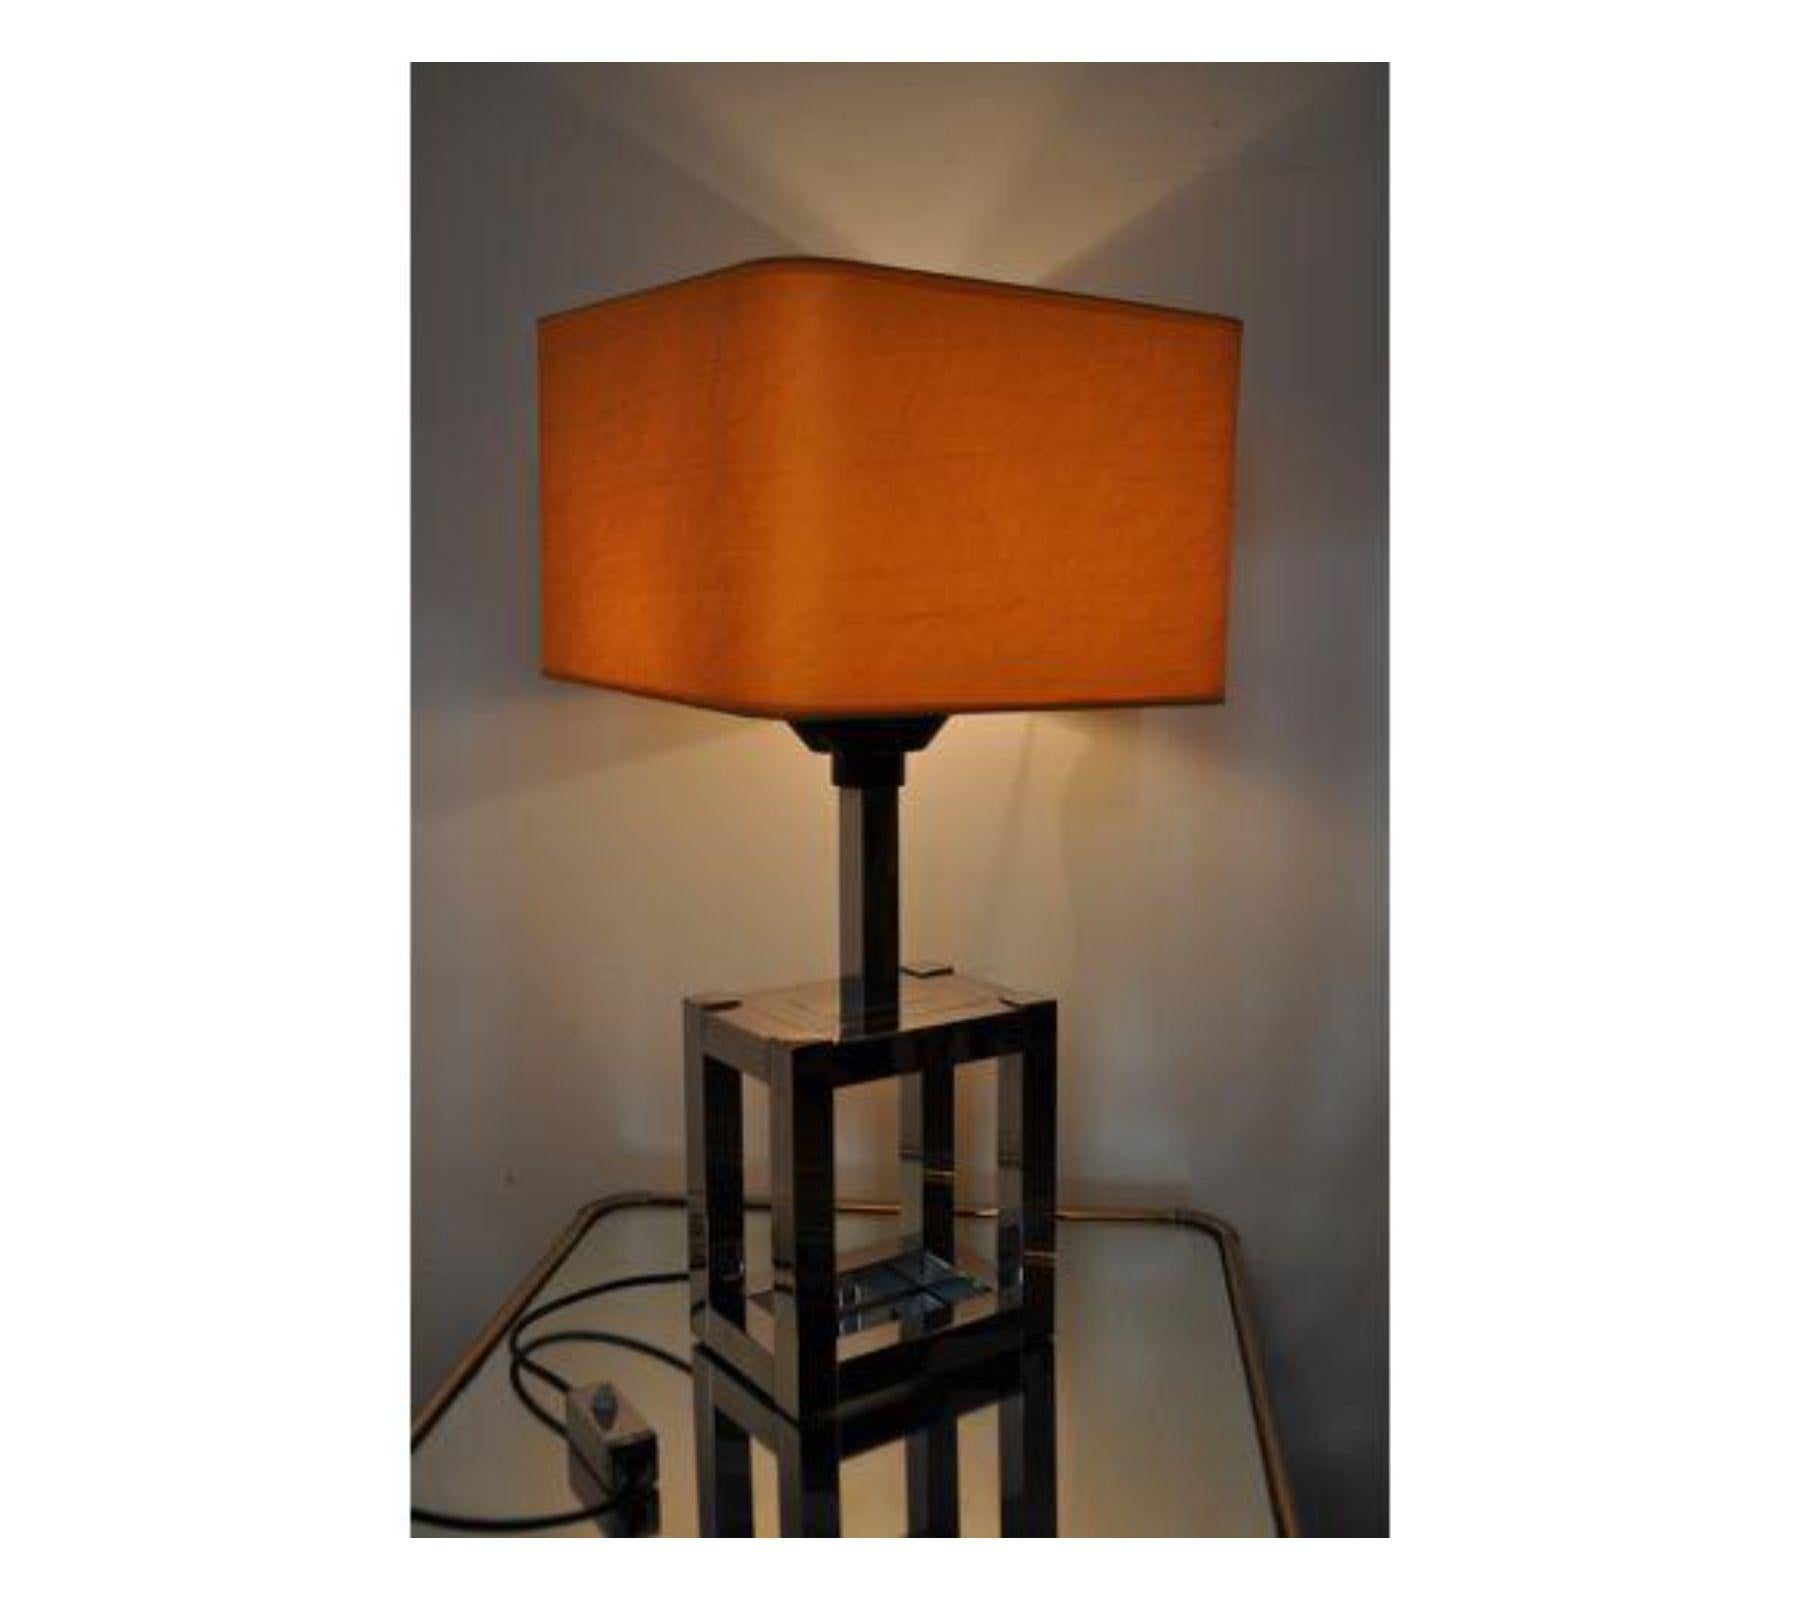 Superb and rare cubic Willy Rizzo table lamp designed in Italy for Lumica circa 1970. The lamp is composed of a chromed cubic structure. This object is a real piece of art and a unique design objet that will be great a highlight to your interior